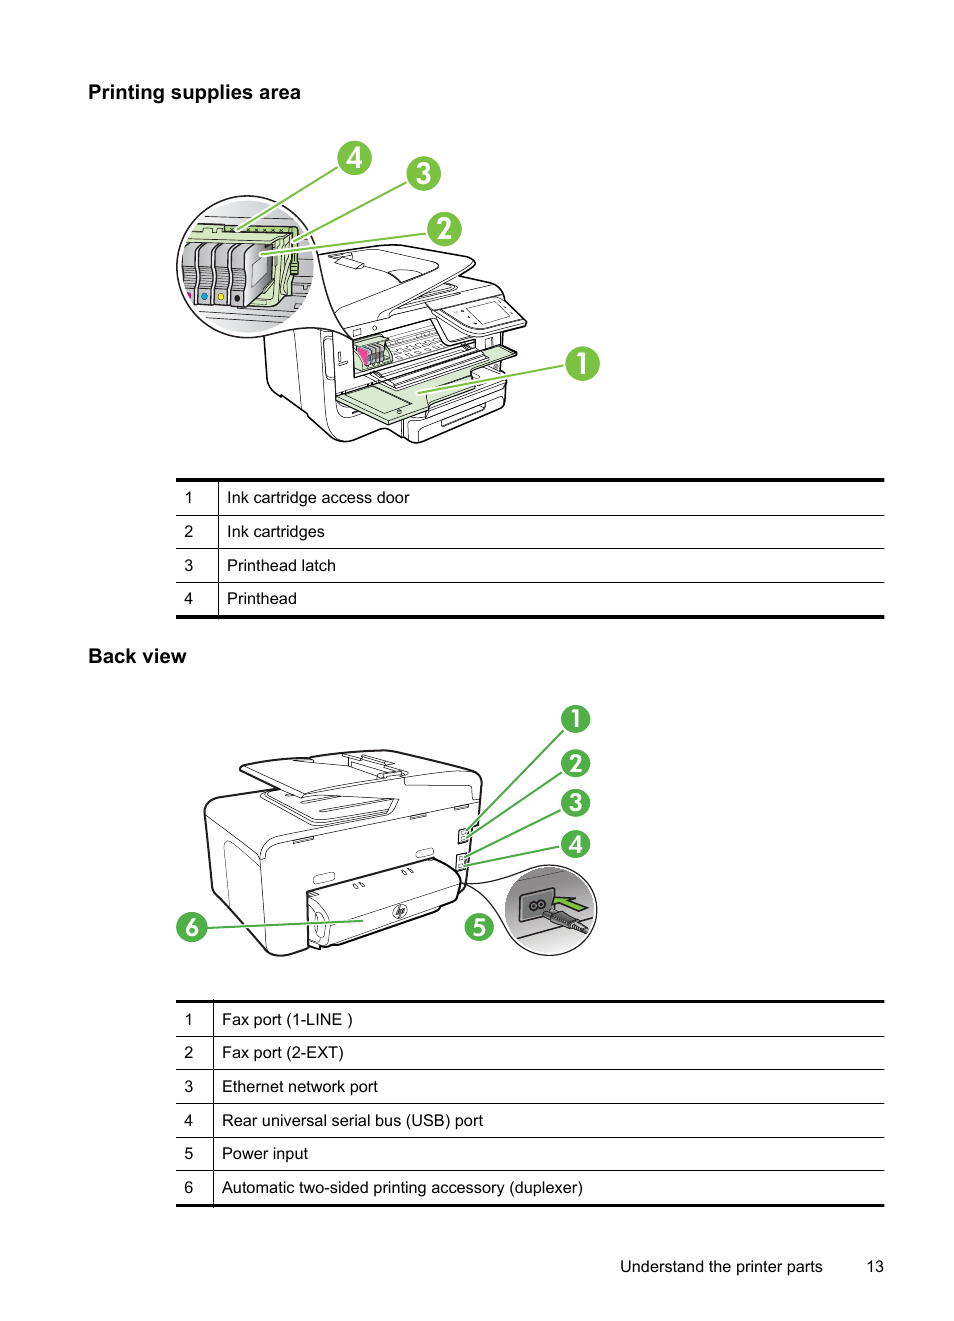 Printing supplies area, Back view | HP Officejet Pro 8600 User Manual